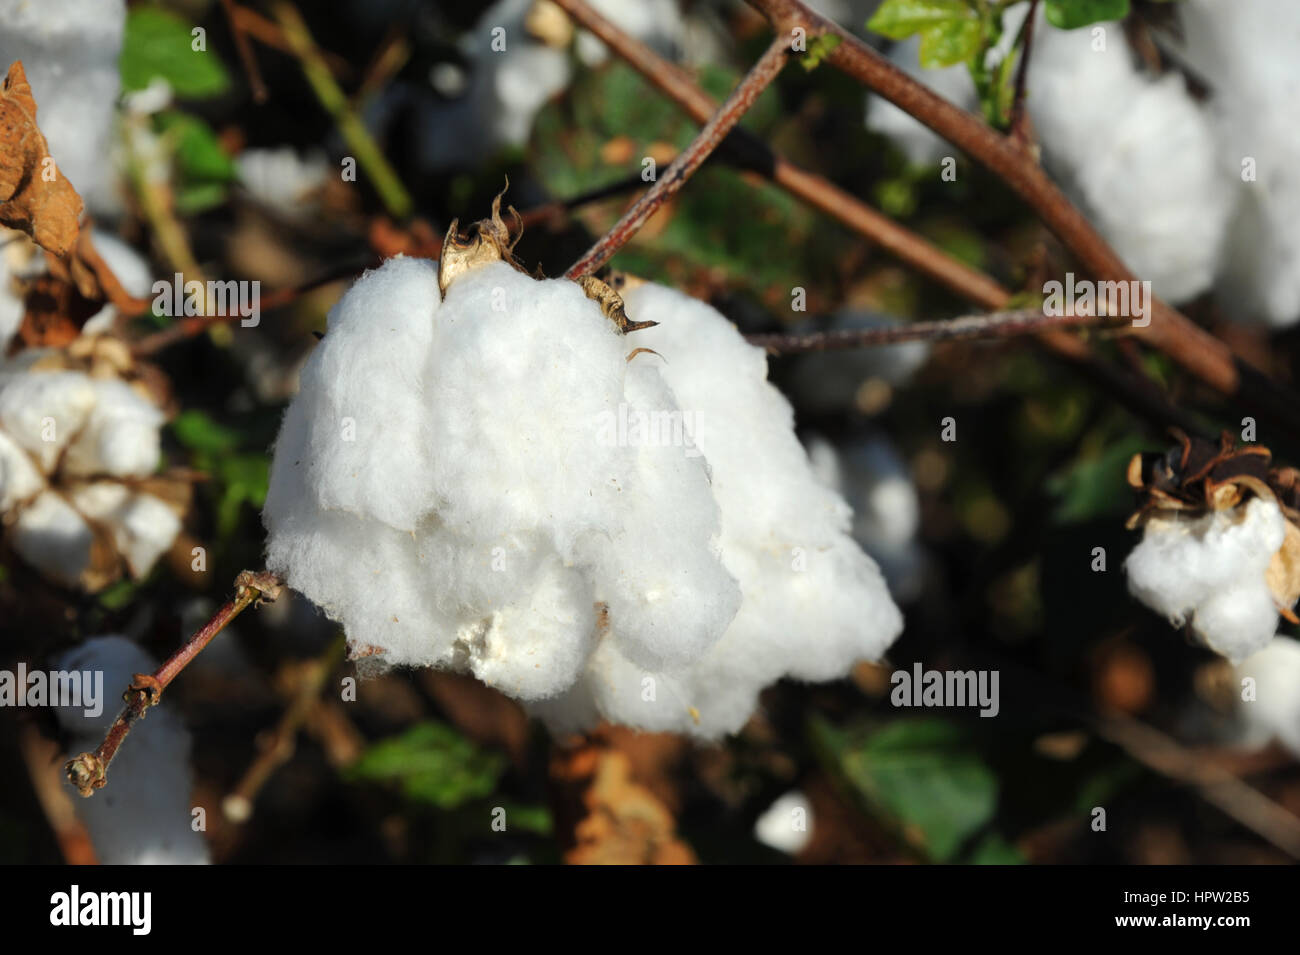 Closeup image shows a fluffy cotton boll at maturity.  Crop is on a farm in Eastern Arkansas. Stock Photo